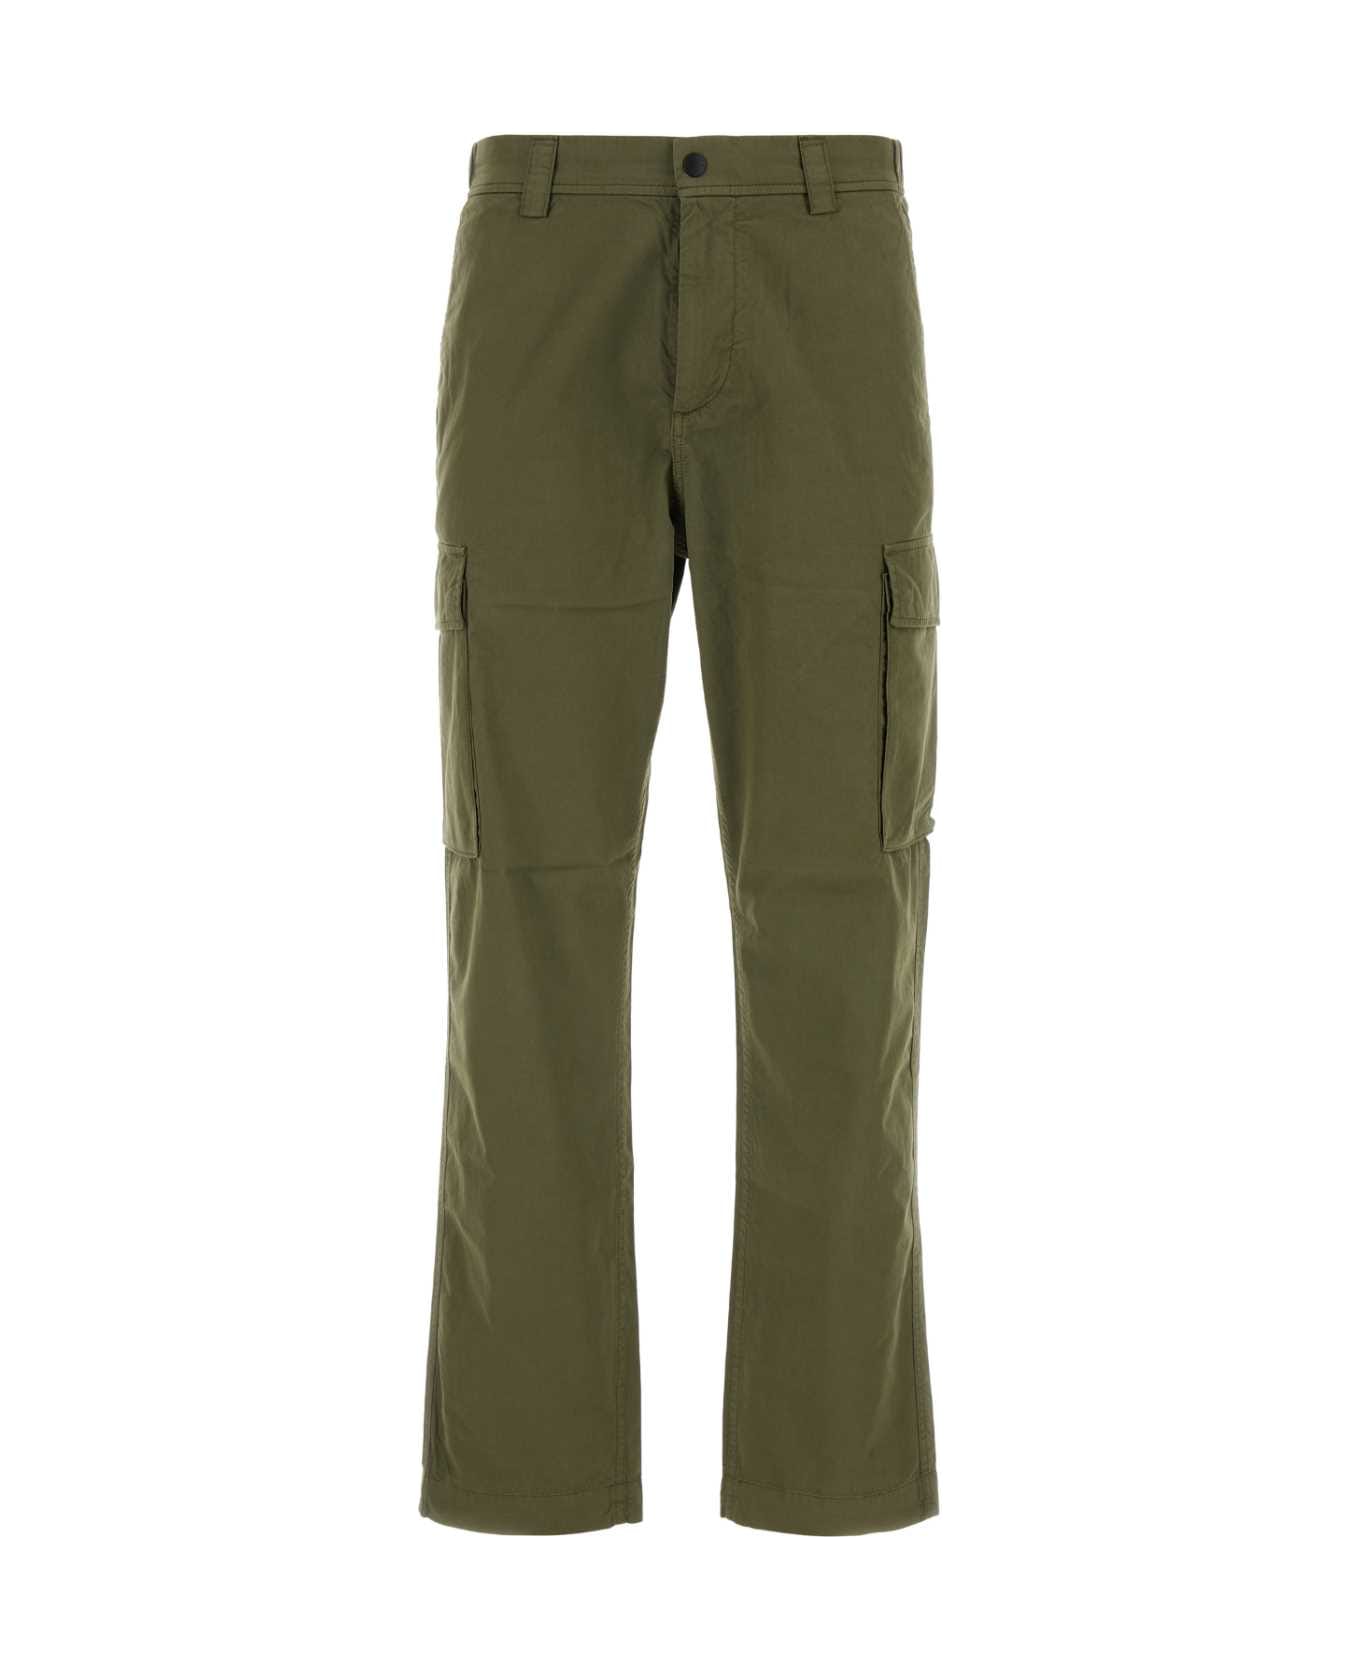 Woolrich Army Green Cotton Pant - 6178 ボトムス